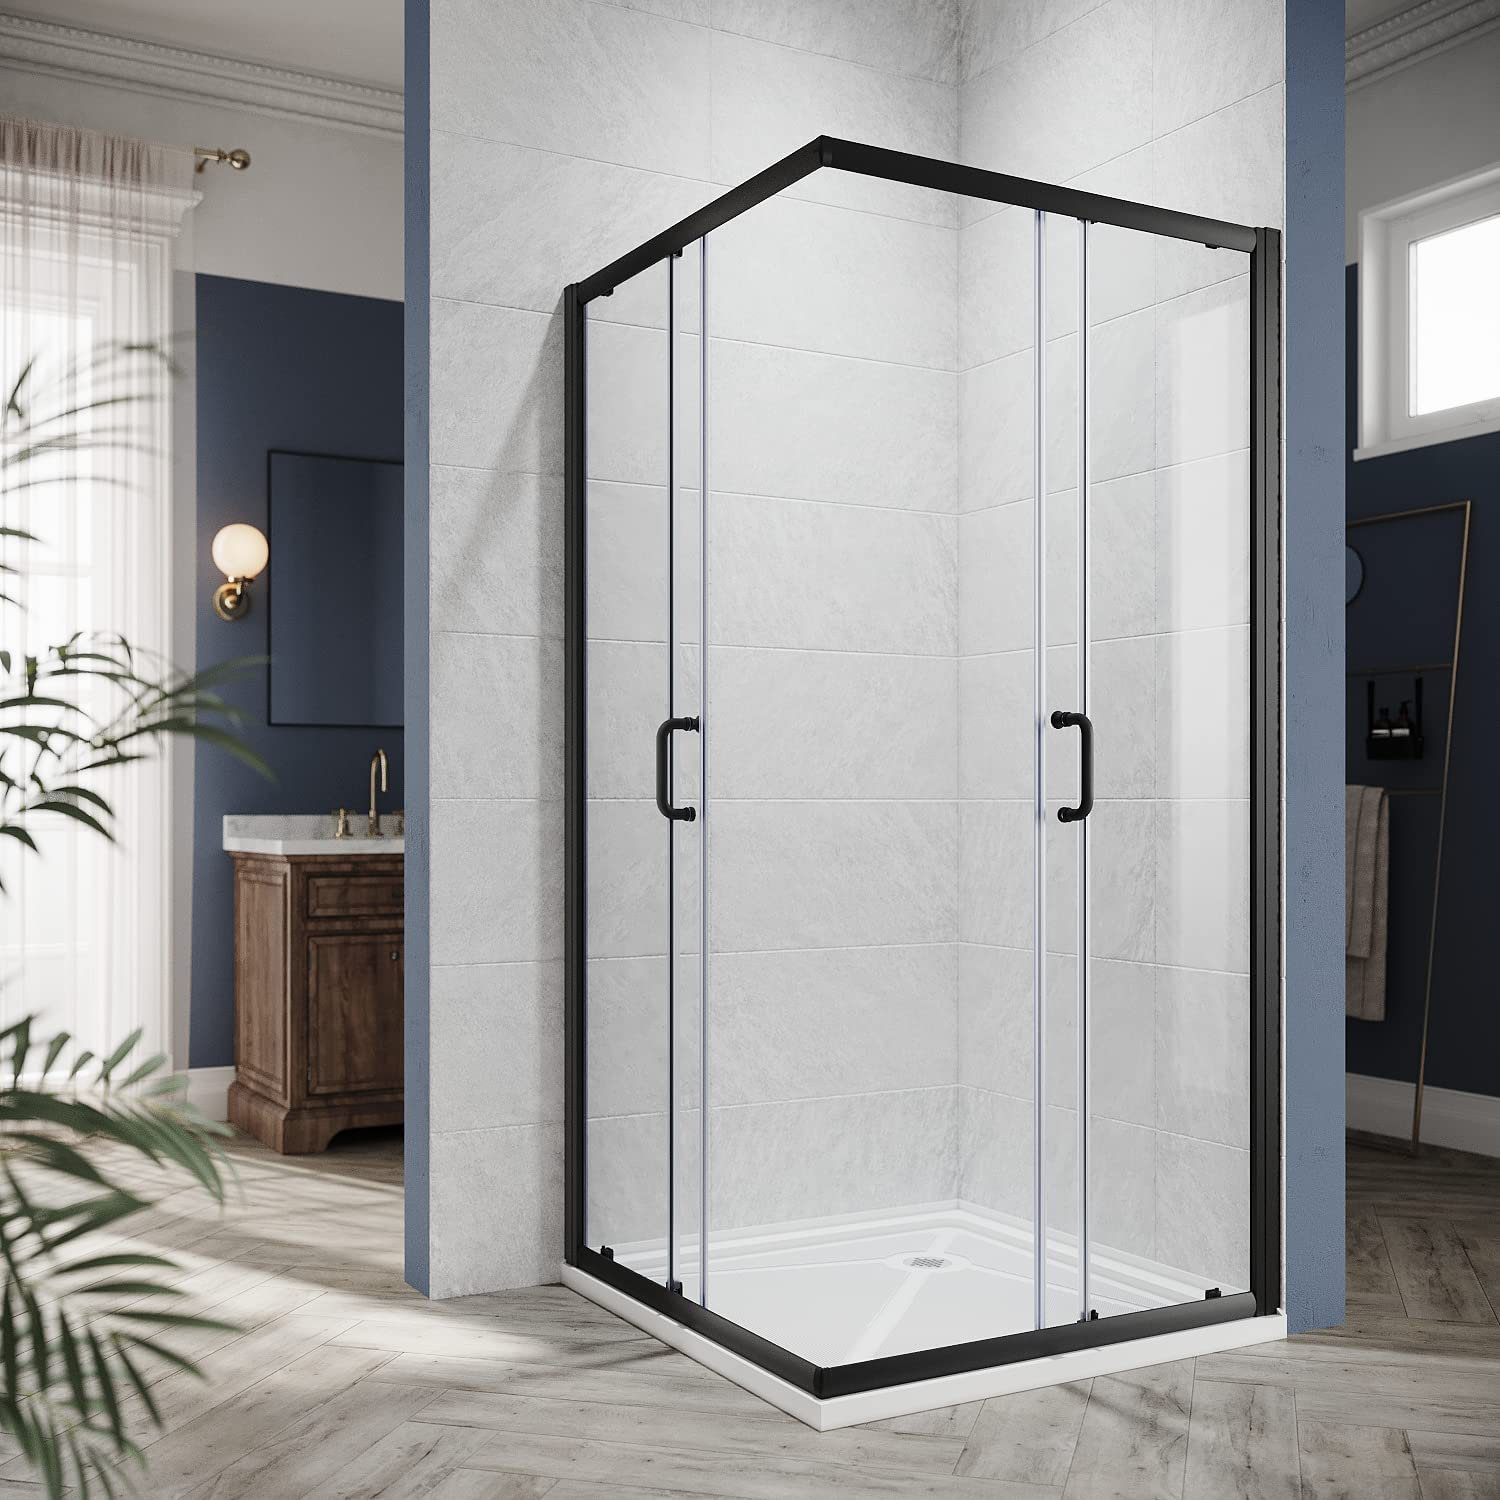 How to Clean Glass Shower Doors - The Organized Mom